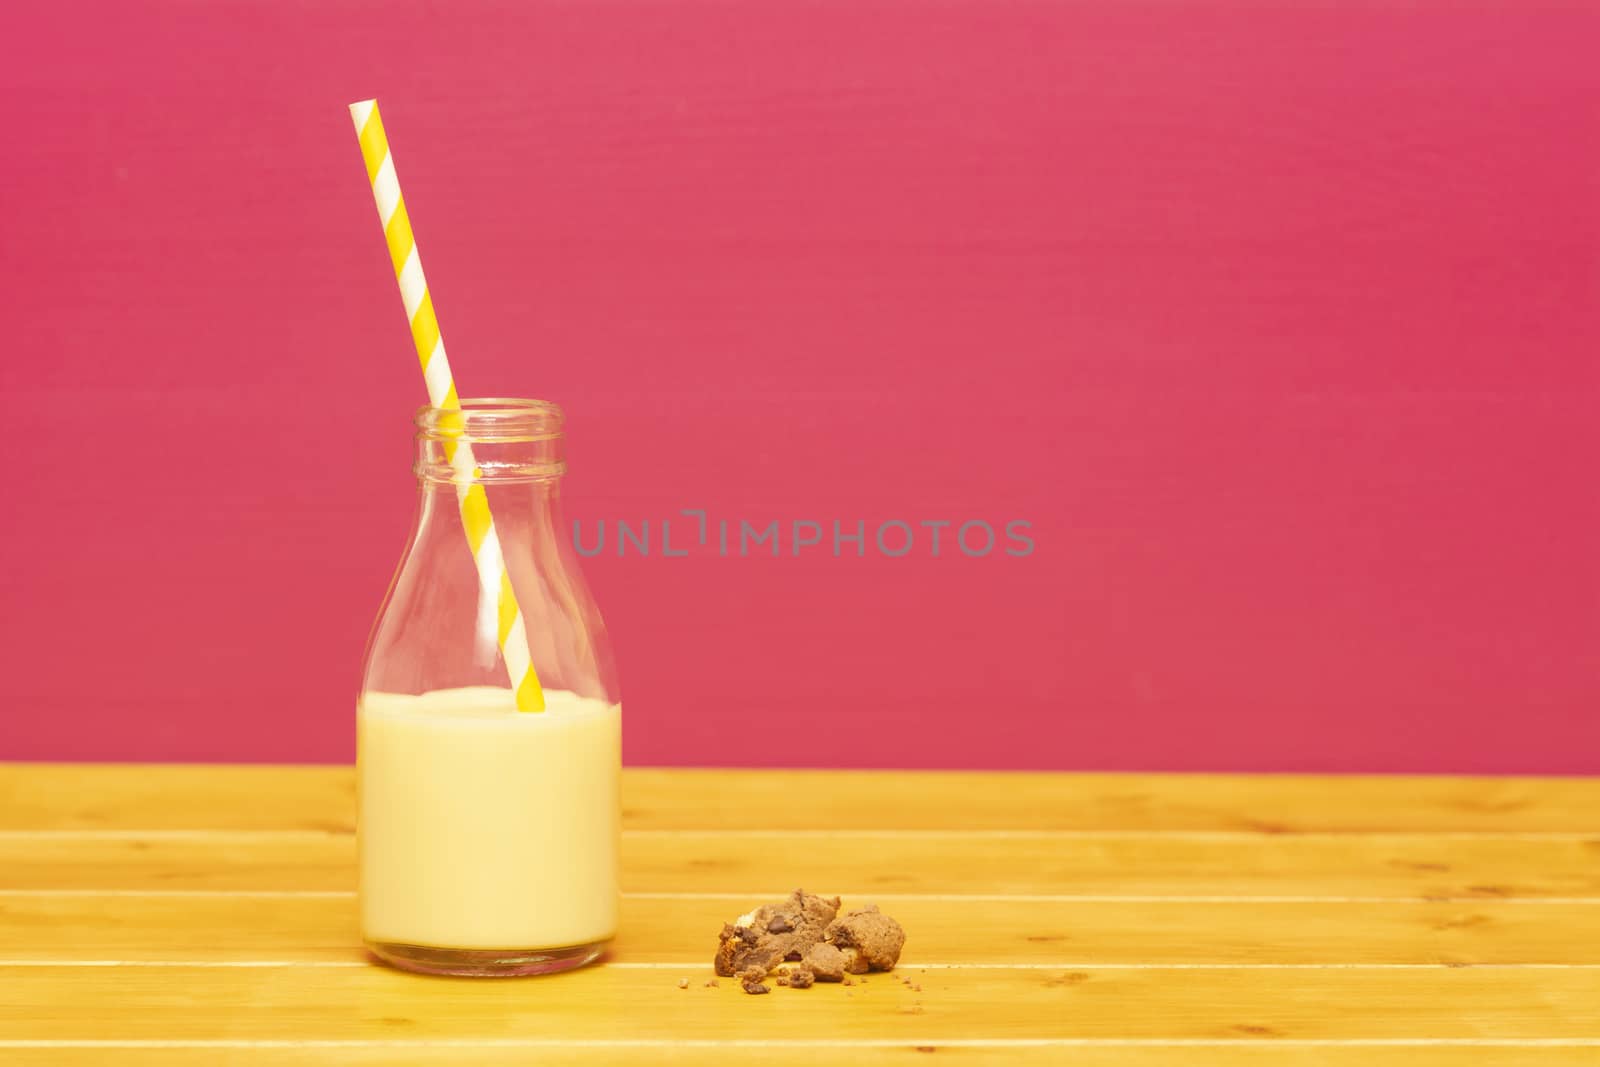 One-third pint glass milk bottle half full with banana milkshake with a retro straw and a half-eaten chocolate chip cookie, on a wooden table against a pink background